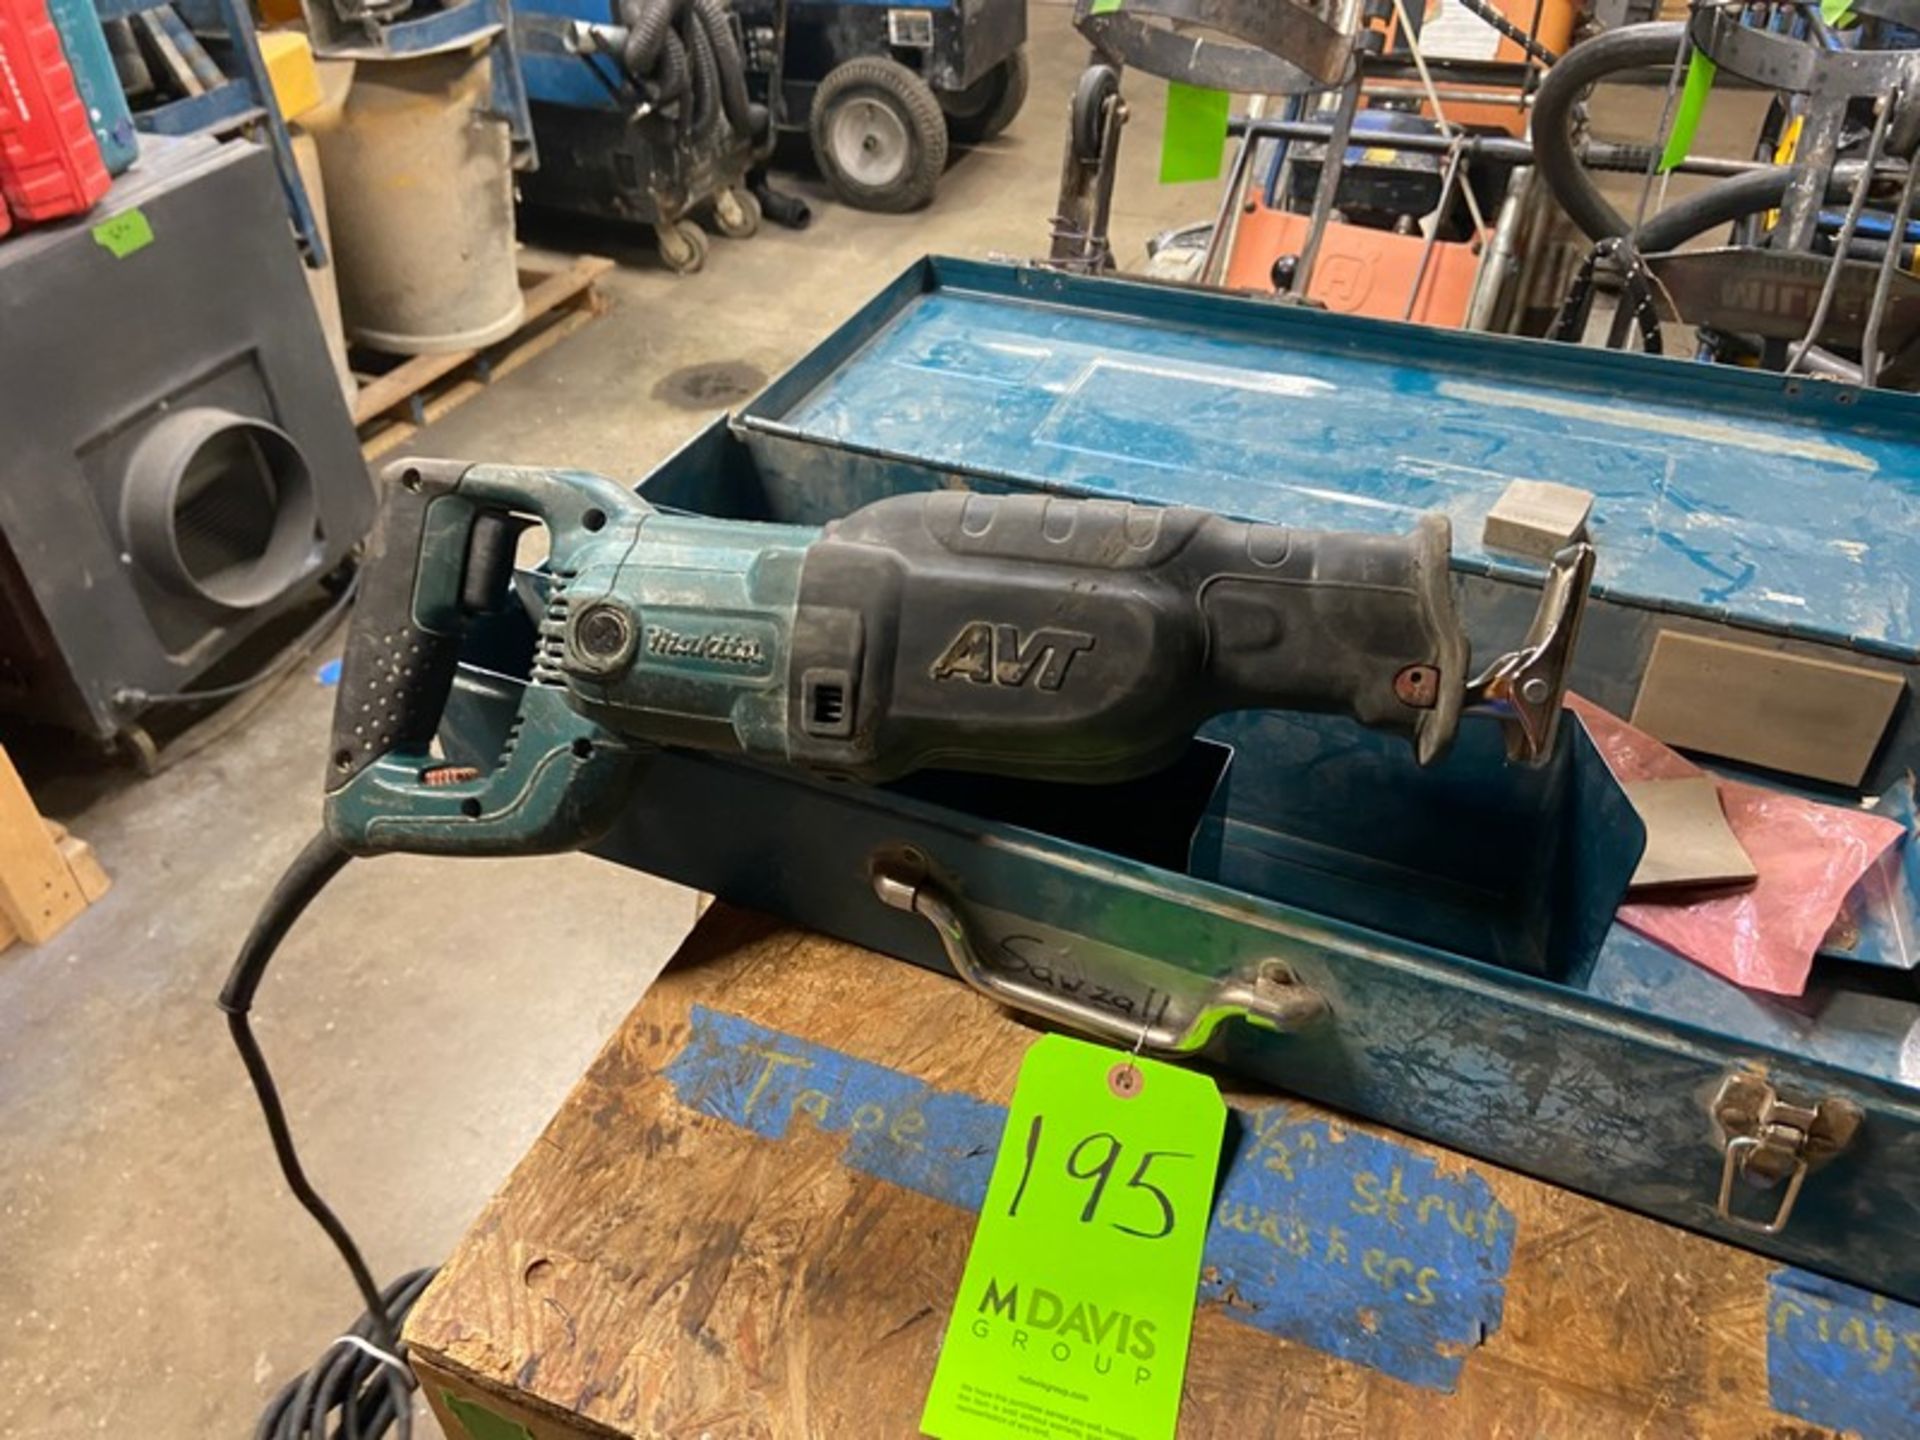 Makita AVT Sawzall Power Tool, S/N 101117A, with Power Cord & Hard Case (LOCATED IN MONROEVILLE, - Image 3 of 4